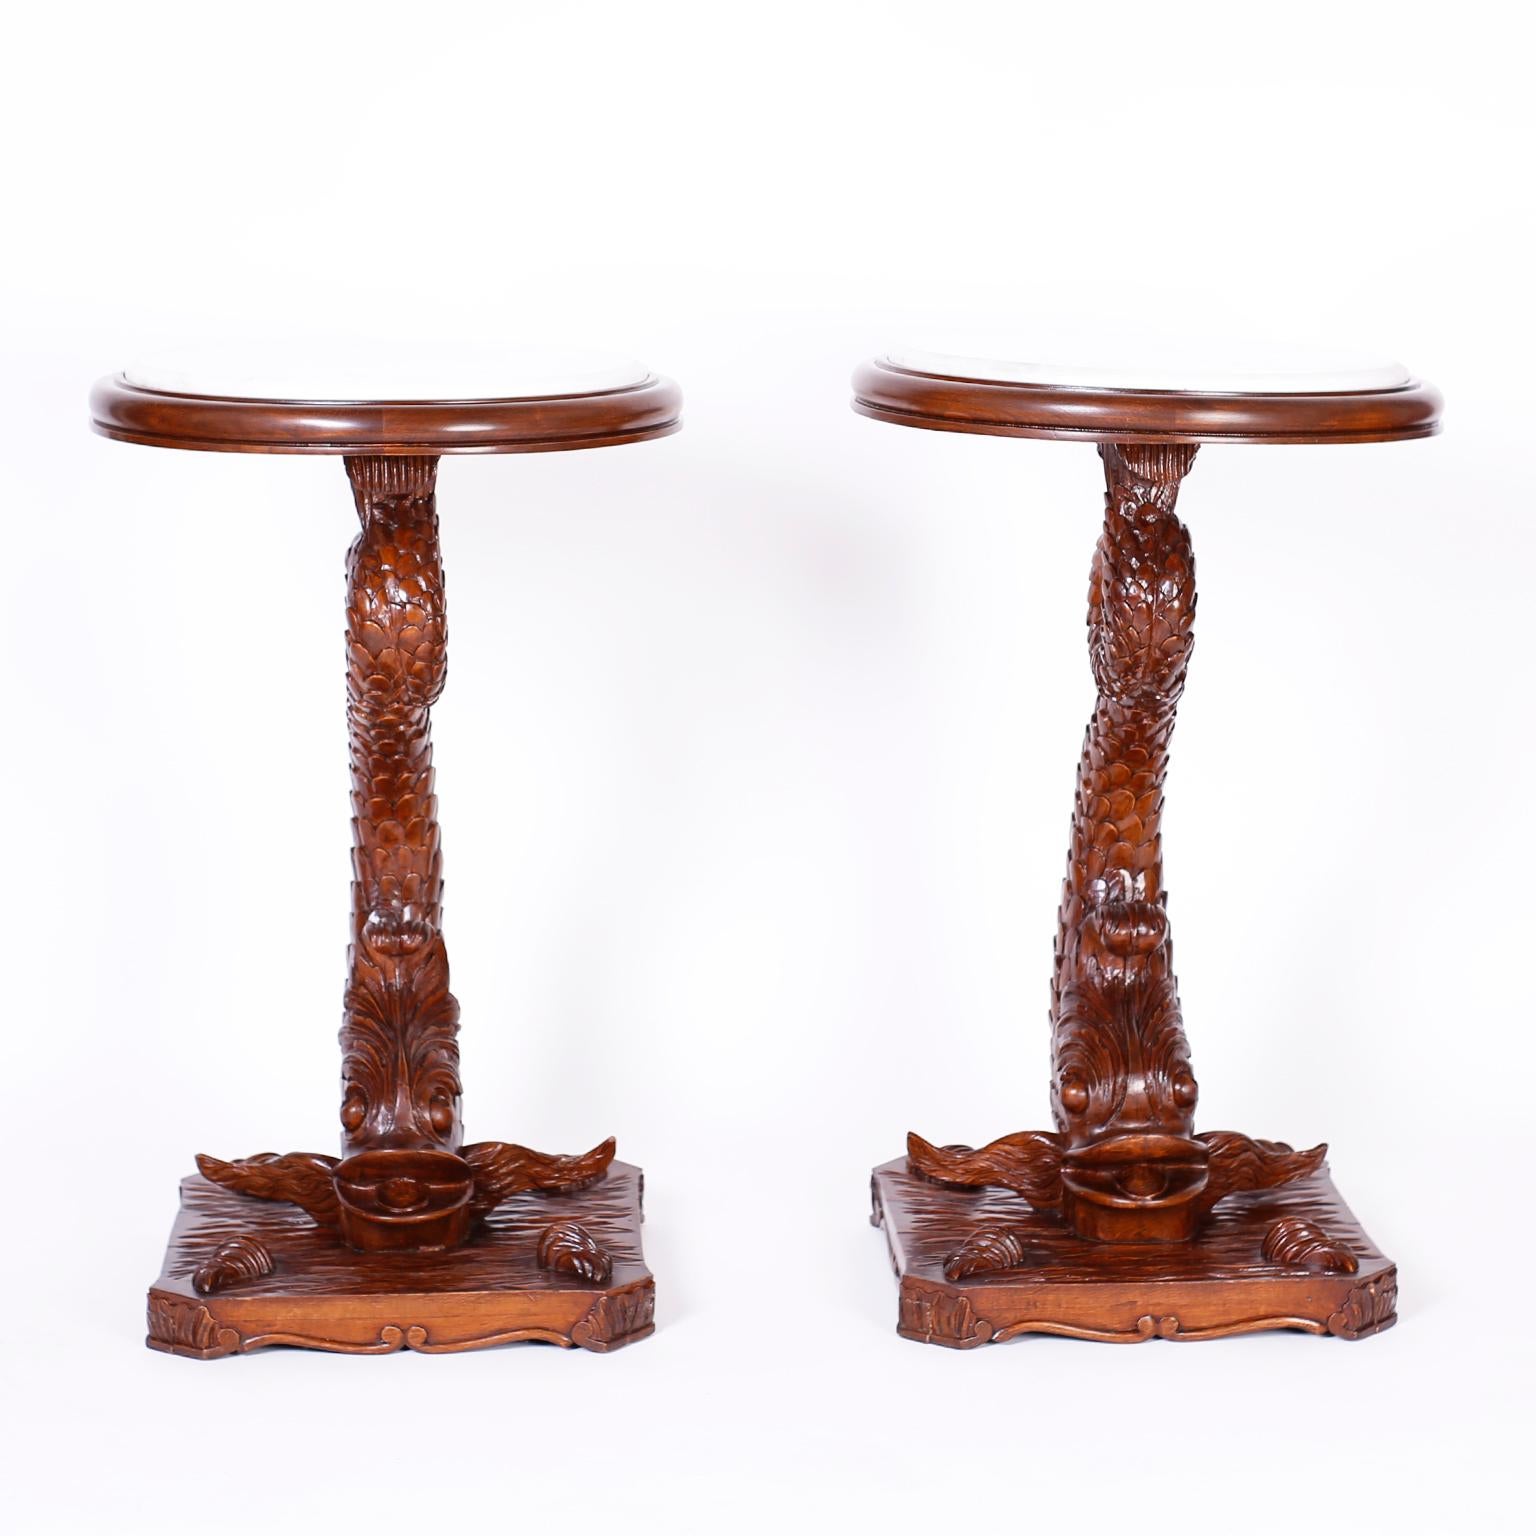 Impressive pair of antique British Colonial stands with white marble tops, crafted in mahogany and expertly carved depicting the mythological dolphins as described by ancient sailors. The bases depict water and sea shells over a classic scrolled